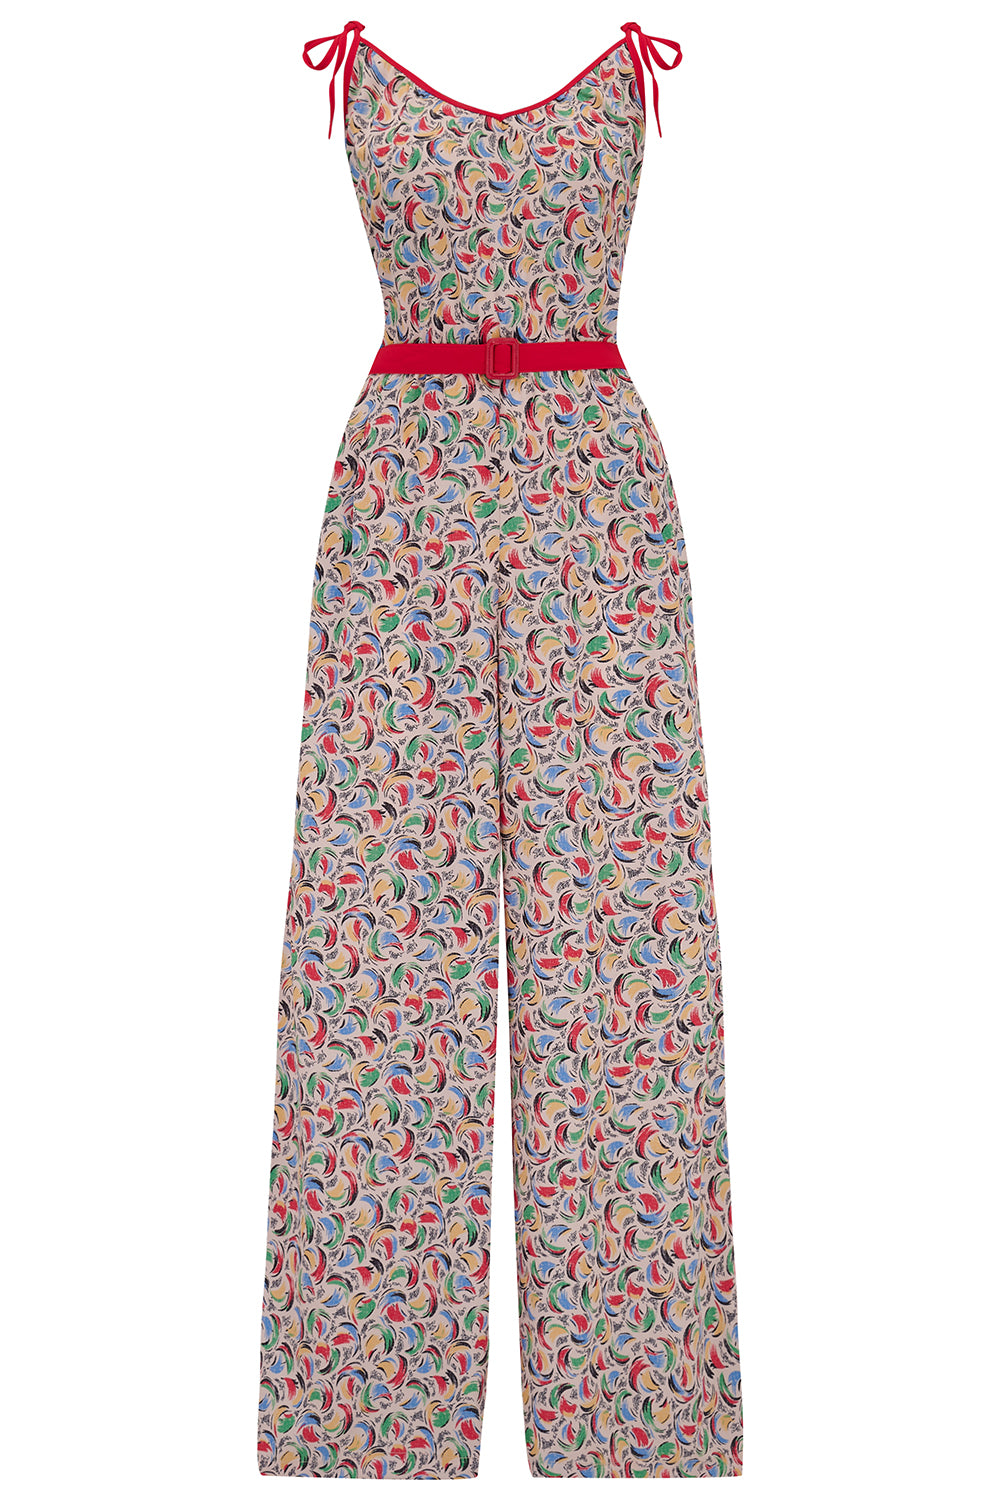 The "Marcie" Jump Suit in Tutti Frutti Print With Contrasts , True & Authentic 1950s Vintage Style - True and authentic vintage style clothing, inspired by the Classic styles of CC41 , WW2 and the fun 1950s RocknRoll era, for everyday wear plus events like Goodwood Revival, Twinwood Festival and Viva Las Vegas Rockabilly Weekend Rock n Romance Rock n Romance